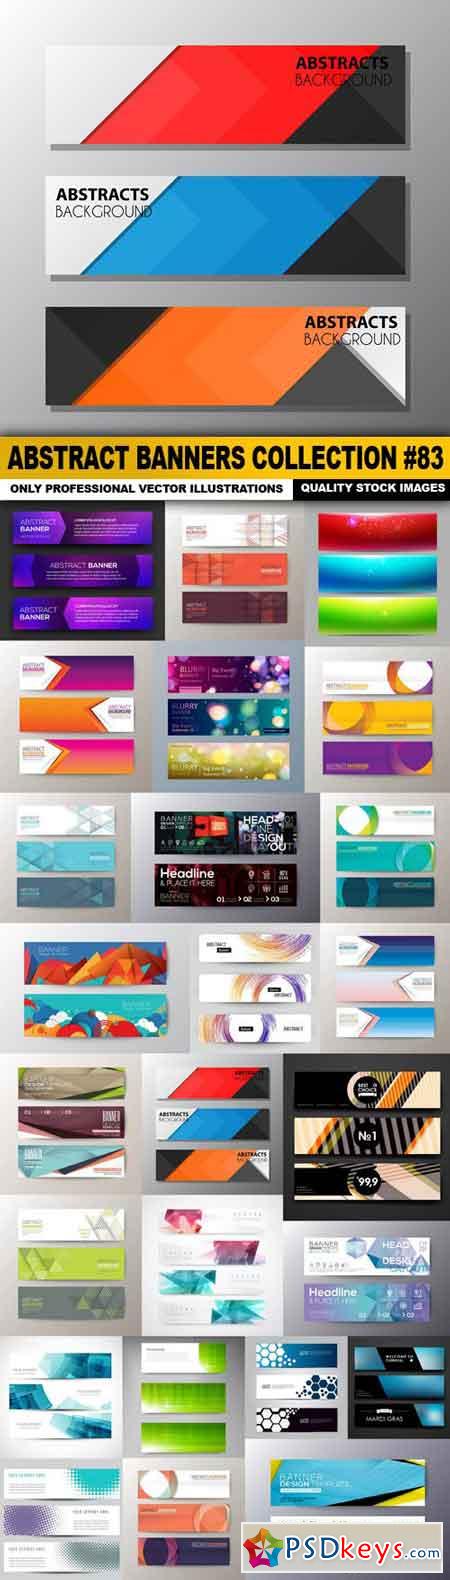 Abstract Banners Collection #83 - 25 Vectors